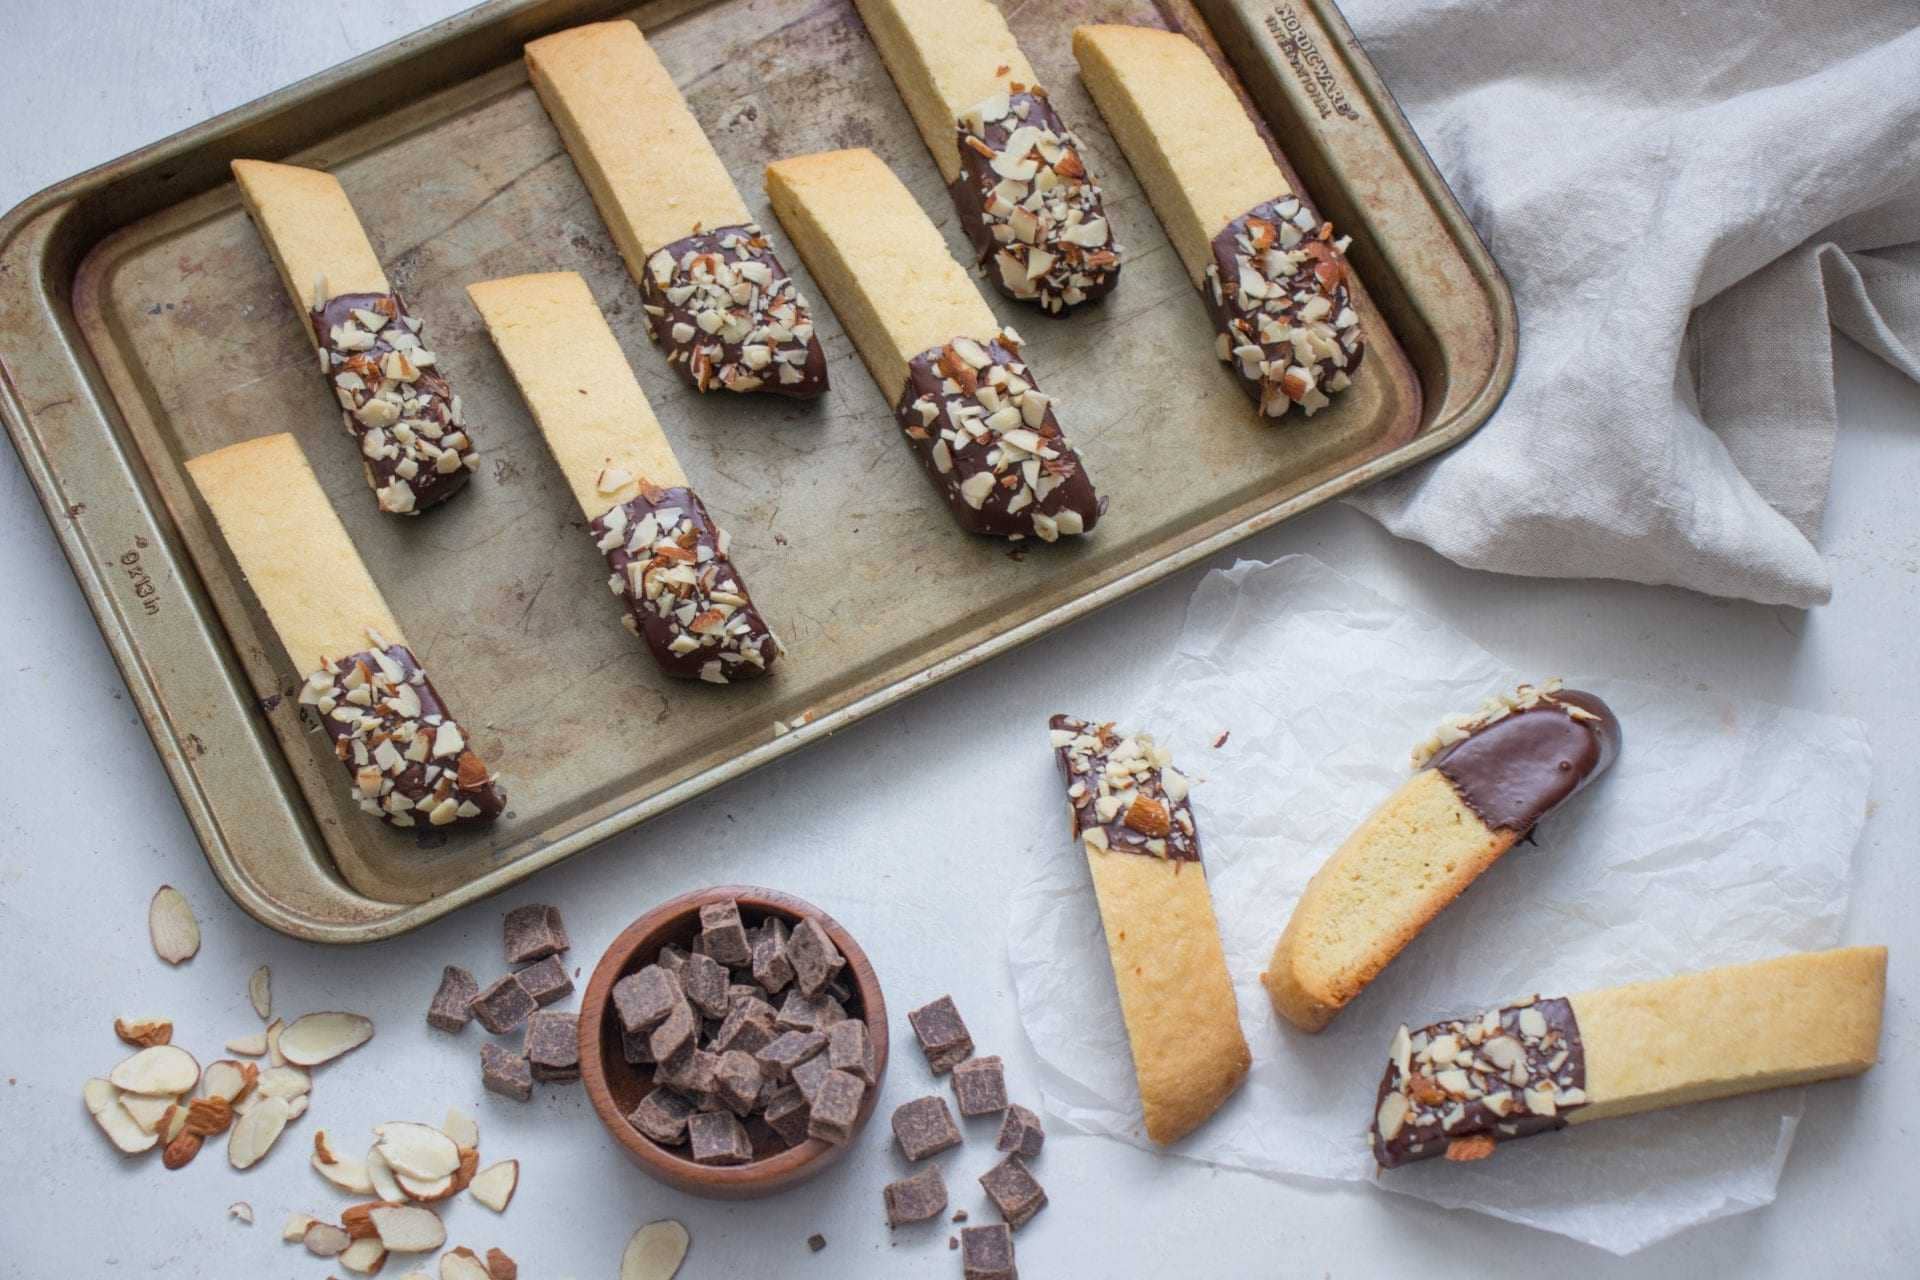 Chocolate Dipped Olive Oil Biscotti with Almonds